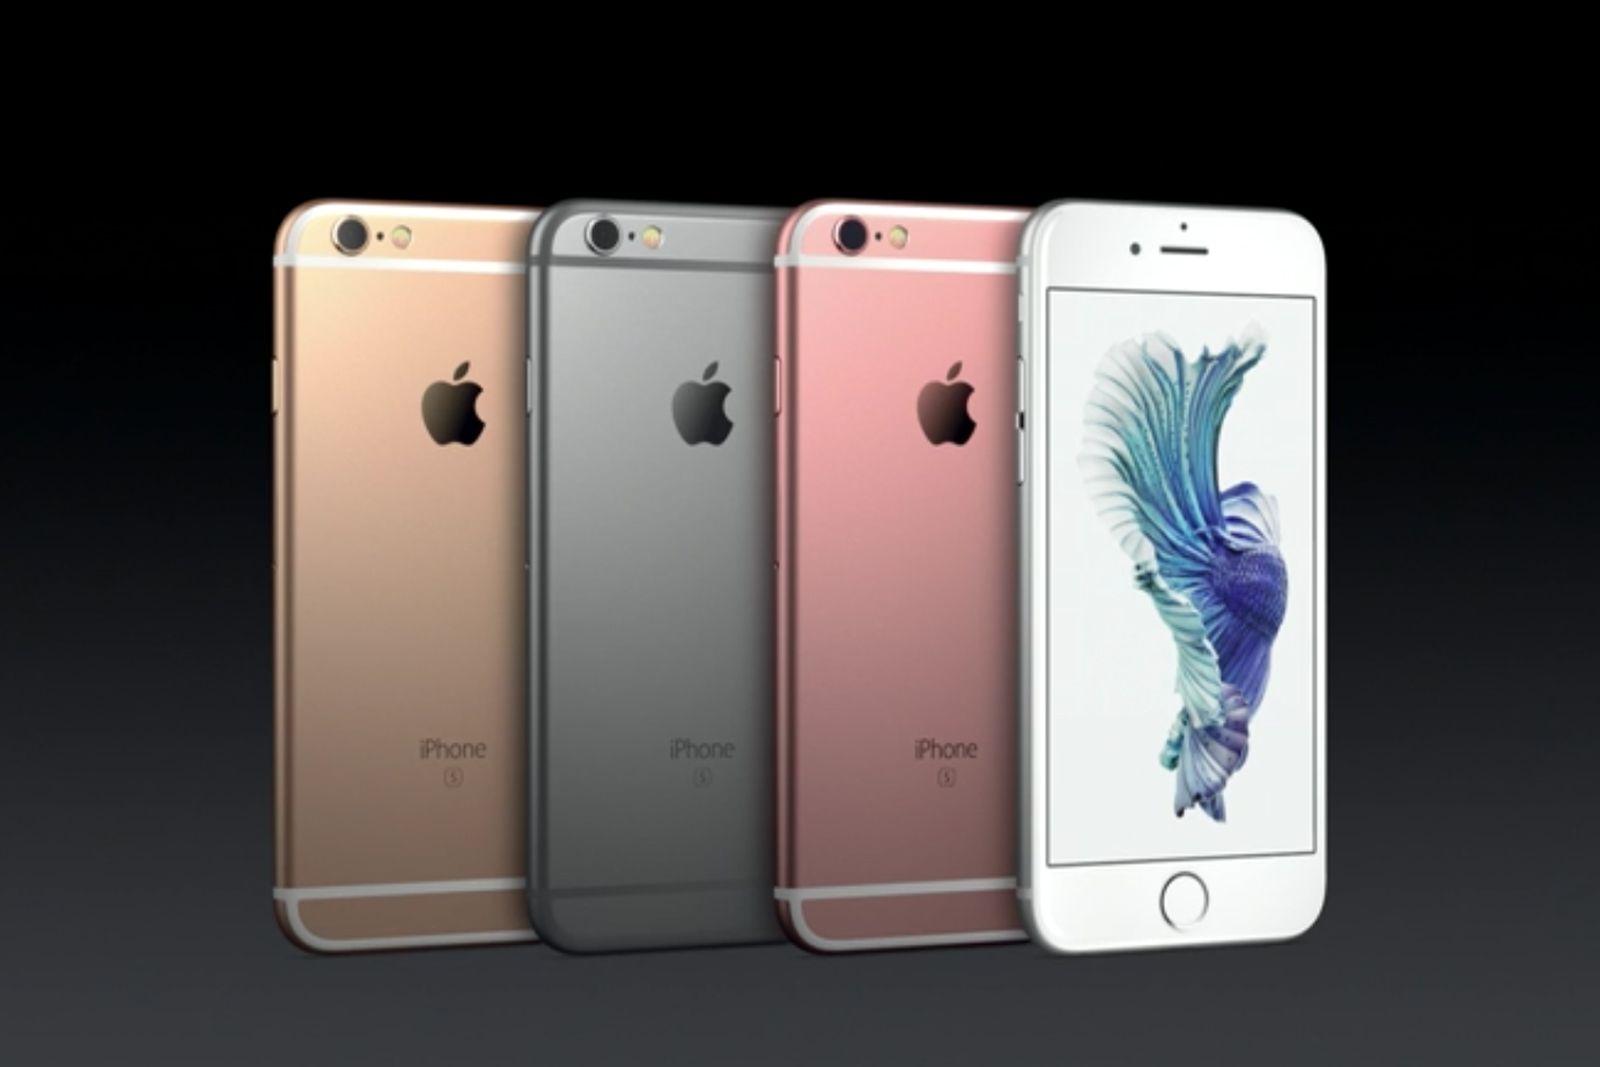 5 new features on the apple iphone 6s and iphone 6s plus image 4